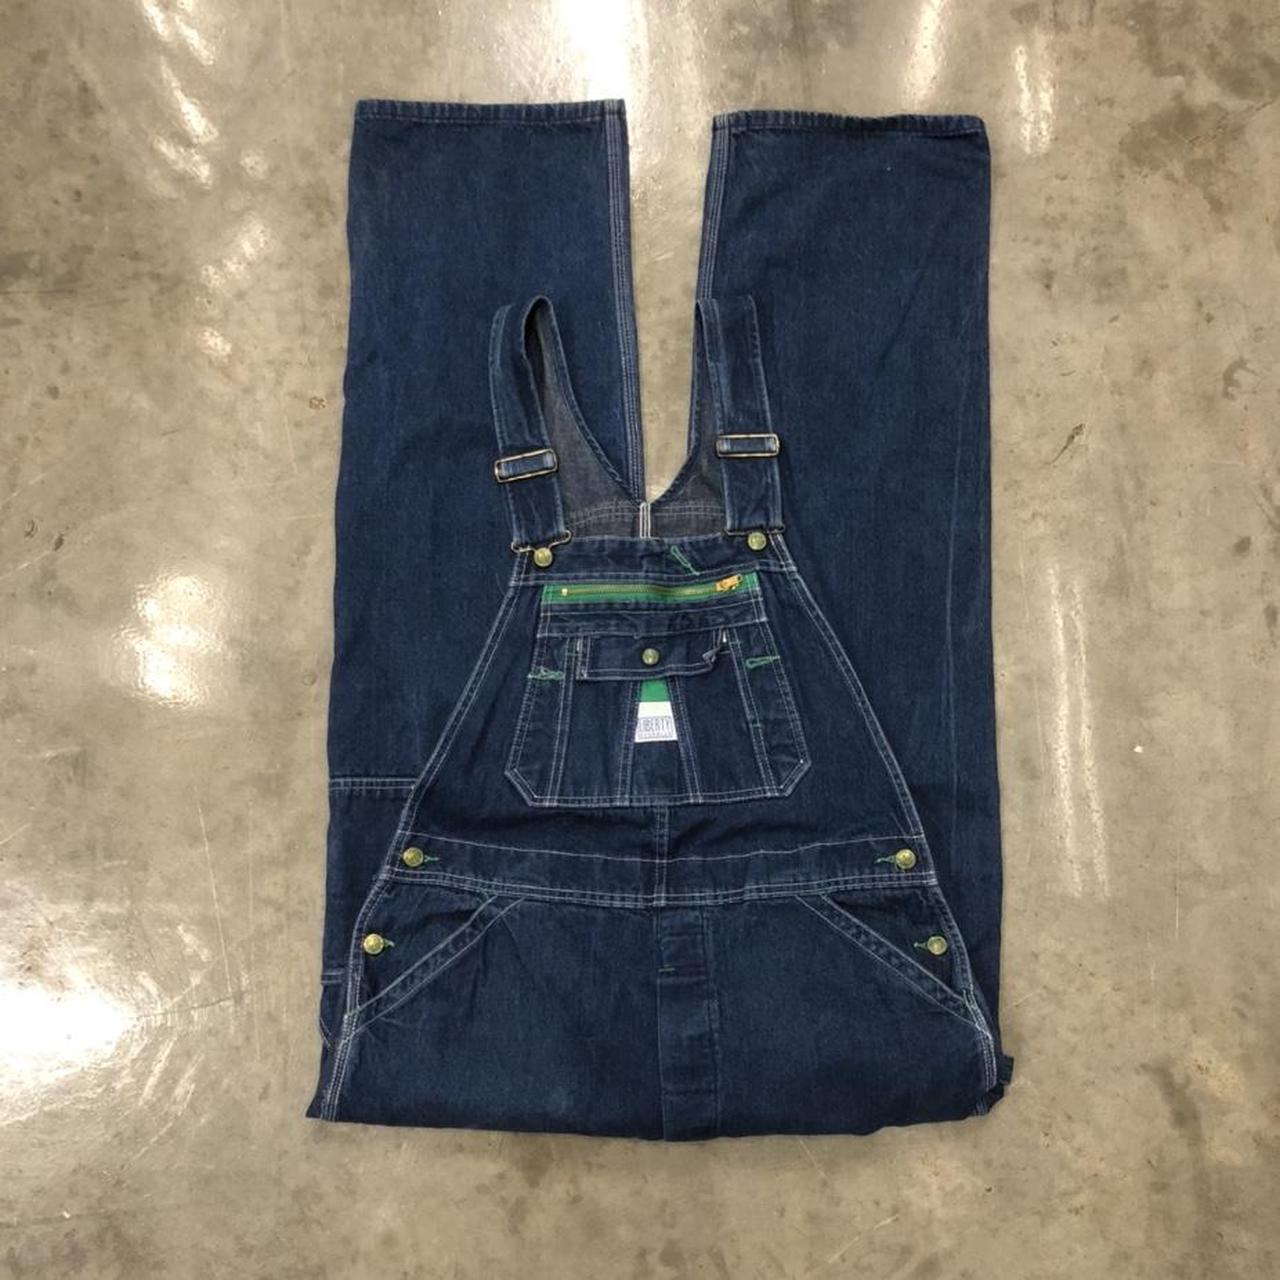 Liberty London Men's Blue and Green Dungarees-overalls